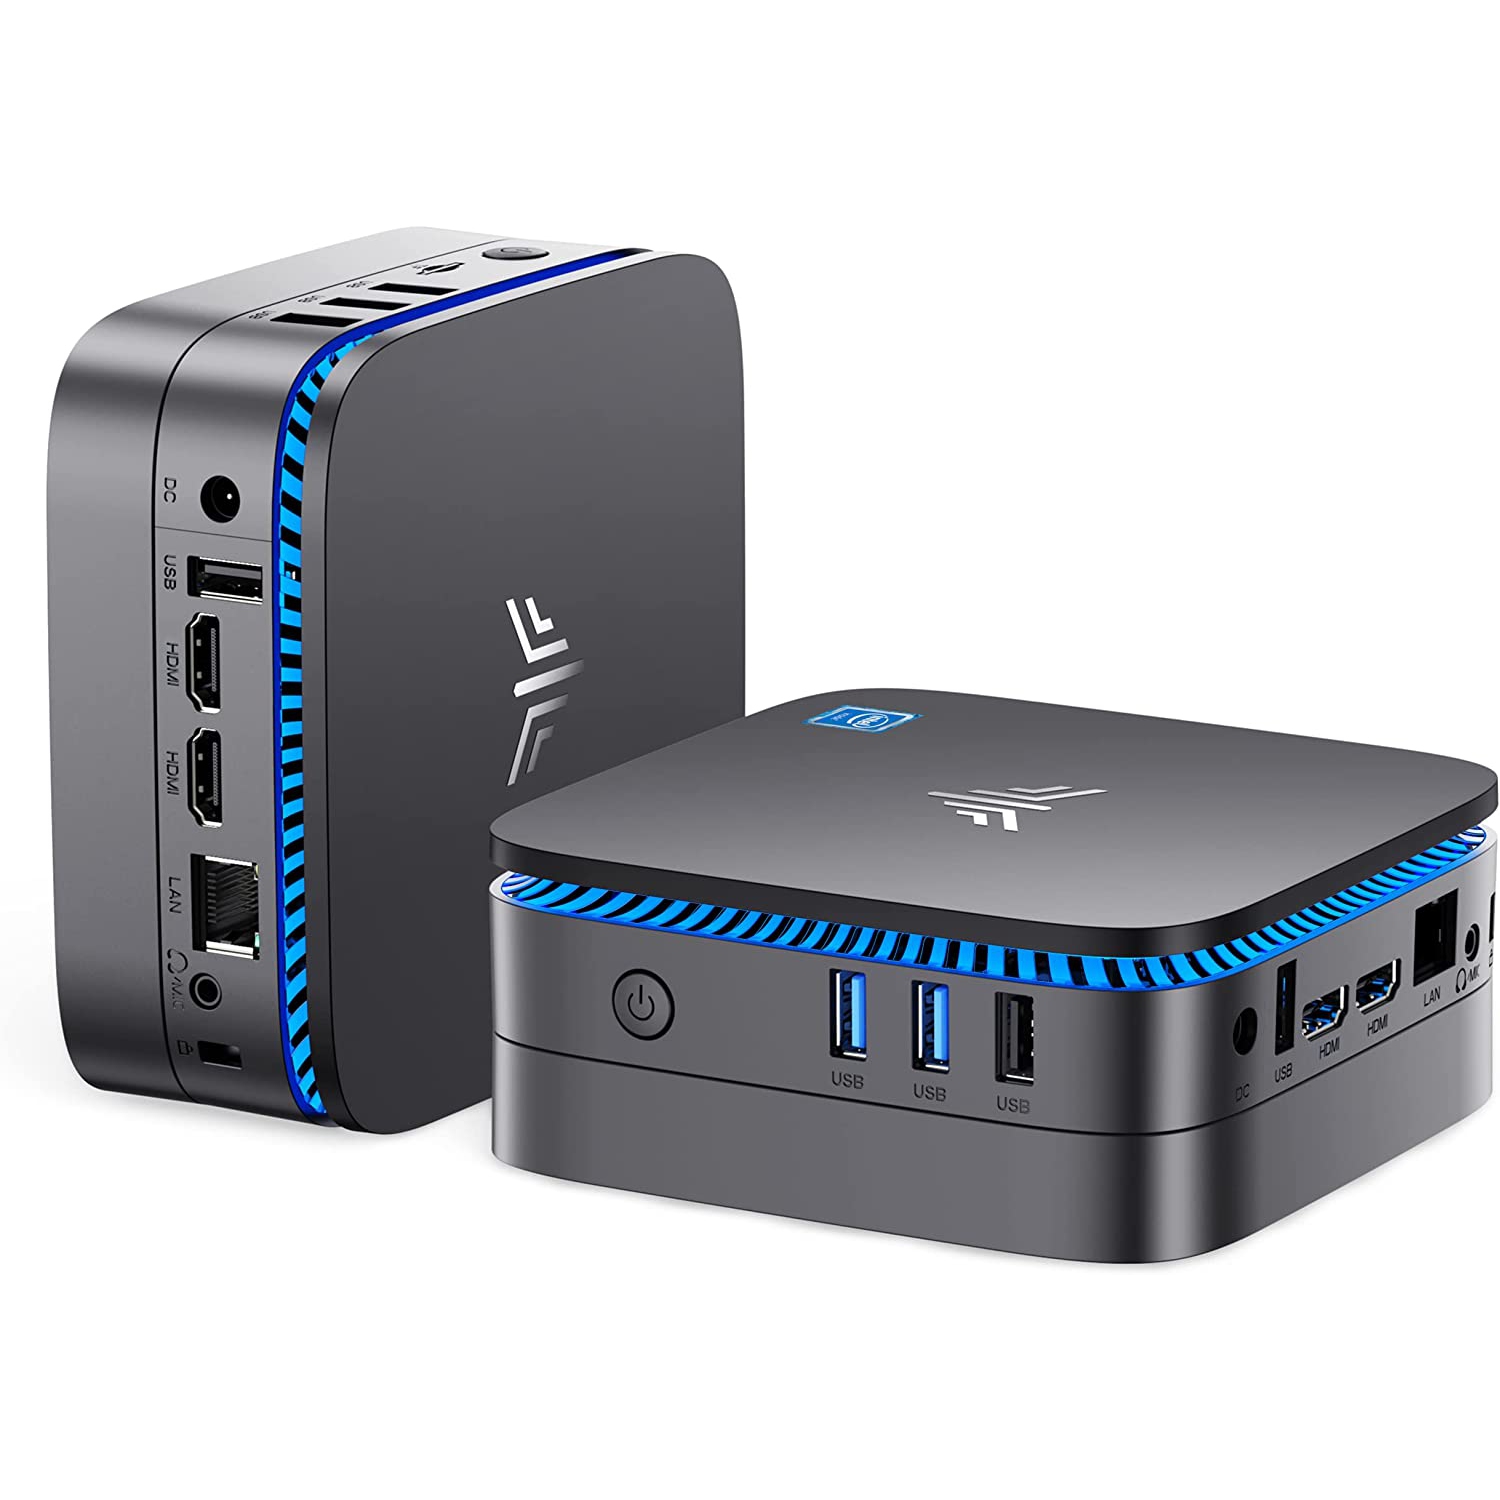 K Mini PC with Windows 11 Pro, Intel Celeron N5105(up to 2.9GHz) Mini Desktop Computers, 8GB RAM/256GB M.2 SSD Micro Computer Support 4K UHD, 2.4G/5.0G Wi-Fi, LAN for Business Hom